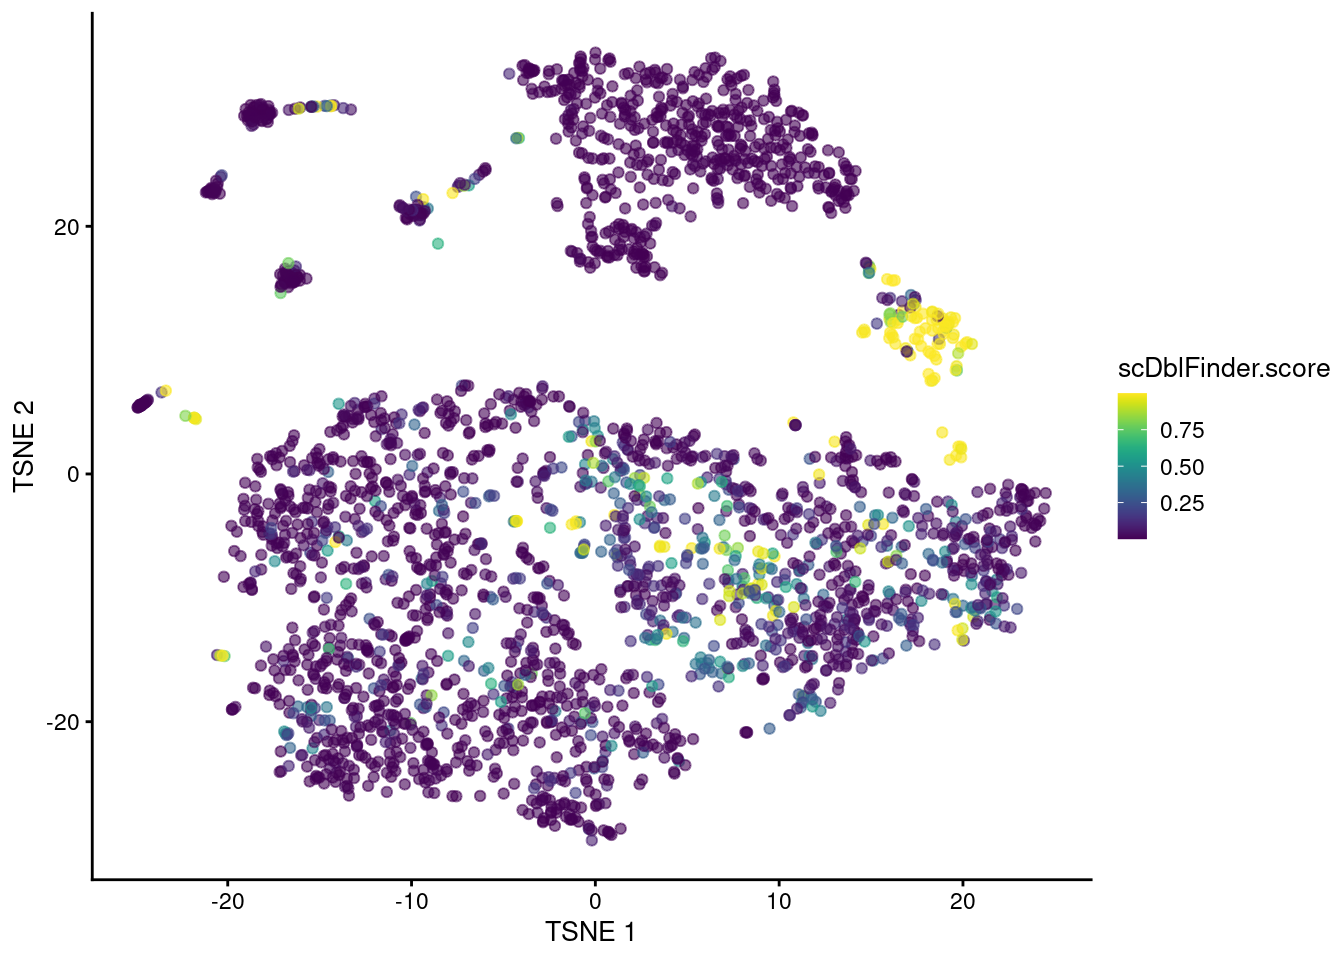 t-SNE plot of the mammary gland data set where each point is a cell coloured according to its `scDblFinder()` score.